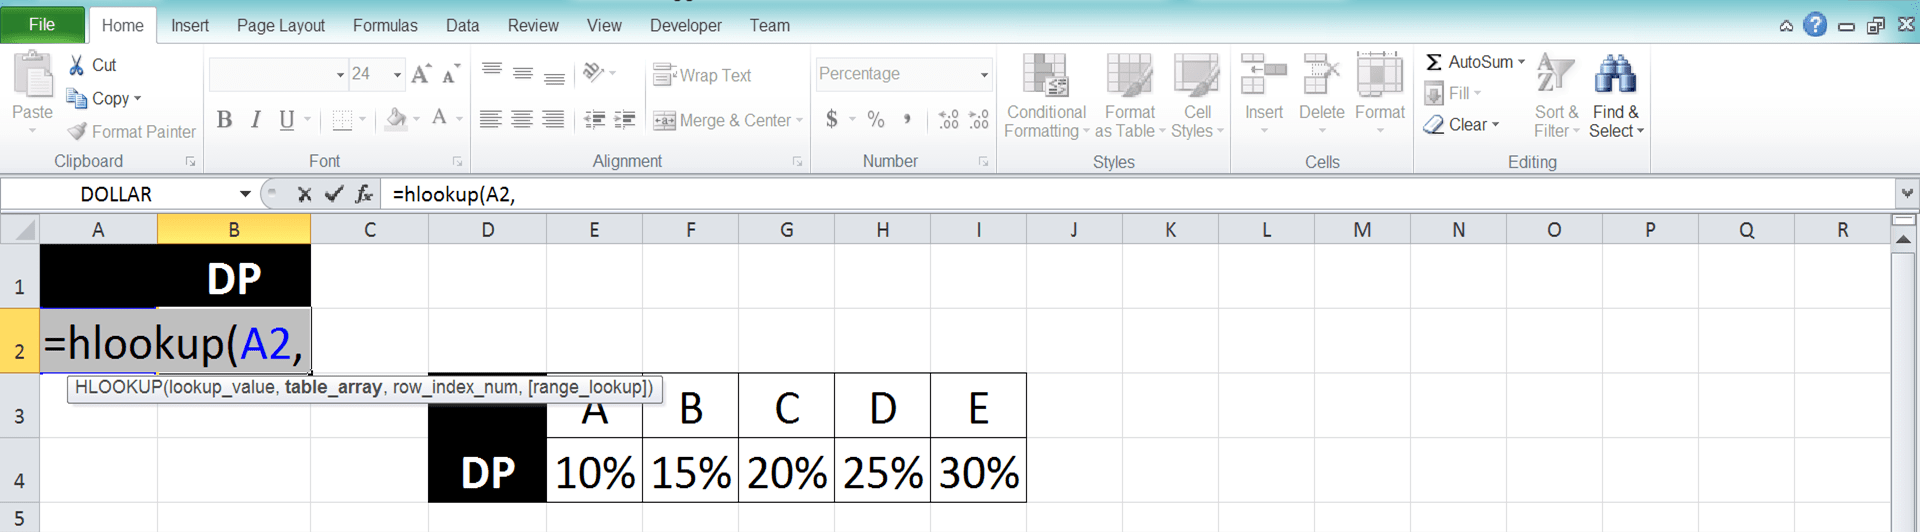 HLOOKUP Formula in Excel: Functions, Examples, and How to Use - Screenshot of Step 3